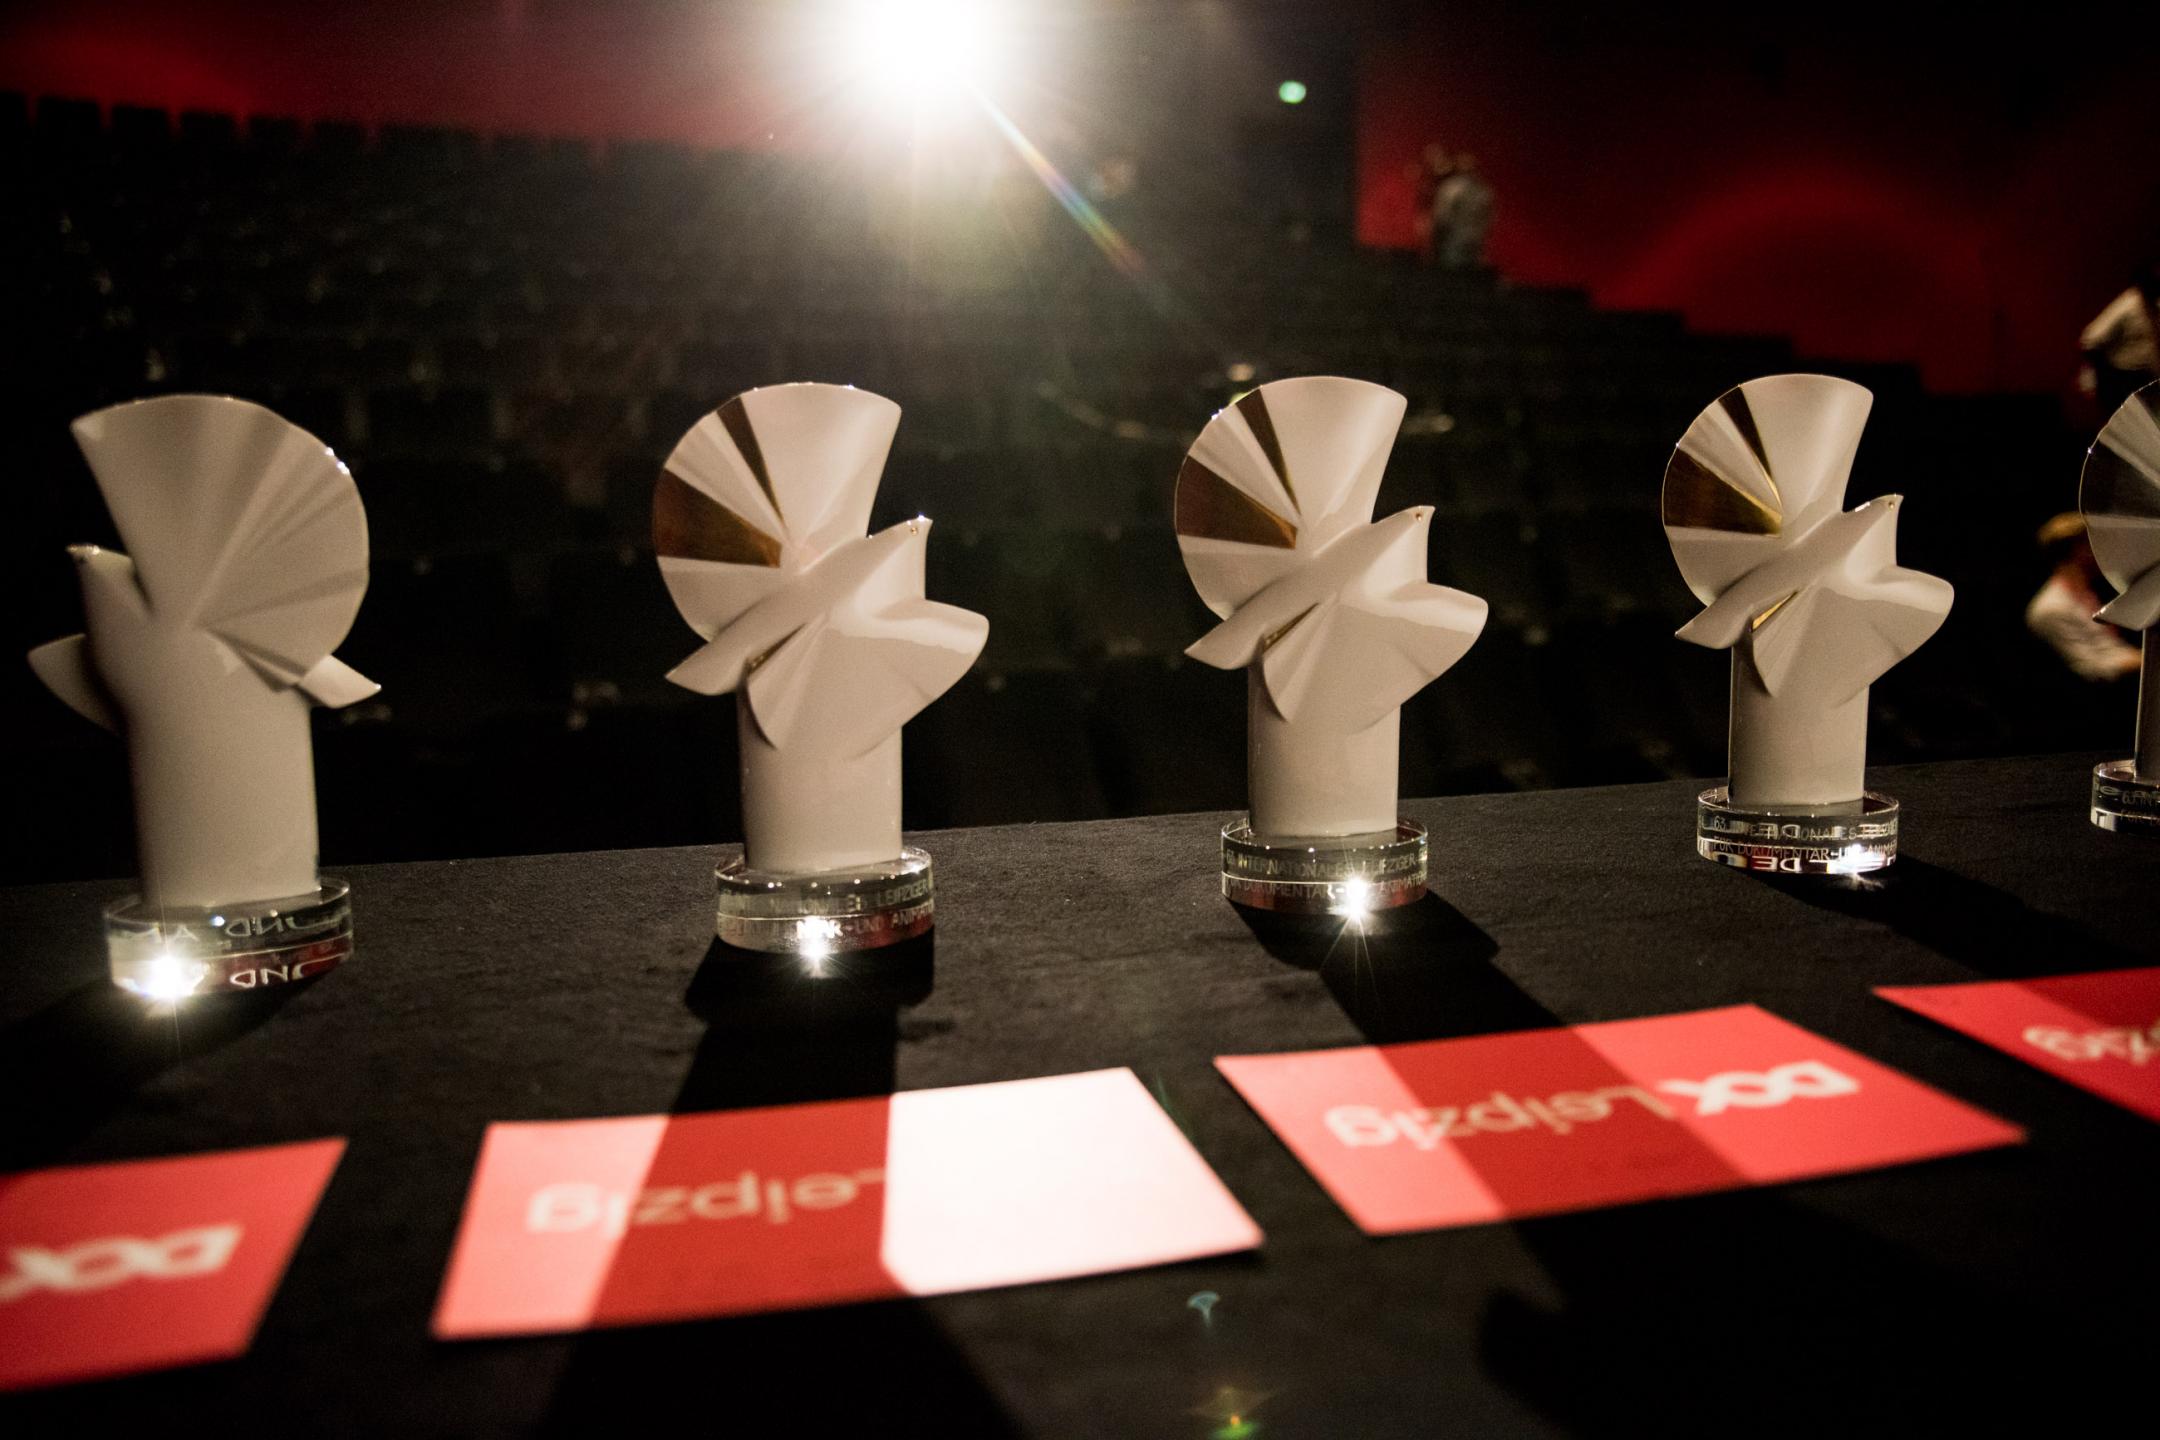 Several Golden Doves standing on a table, in the background you see the seating rows of a movie theatre.